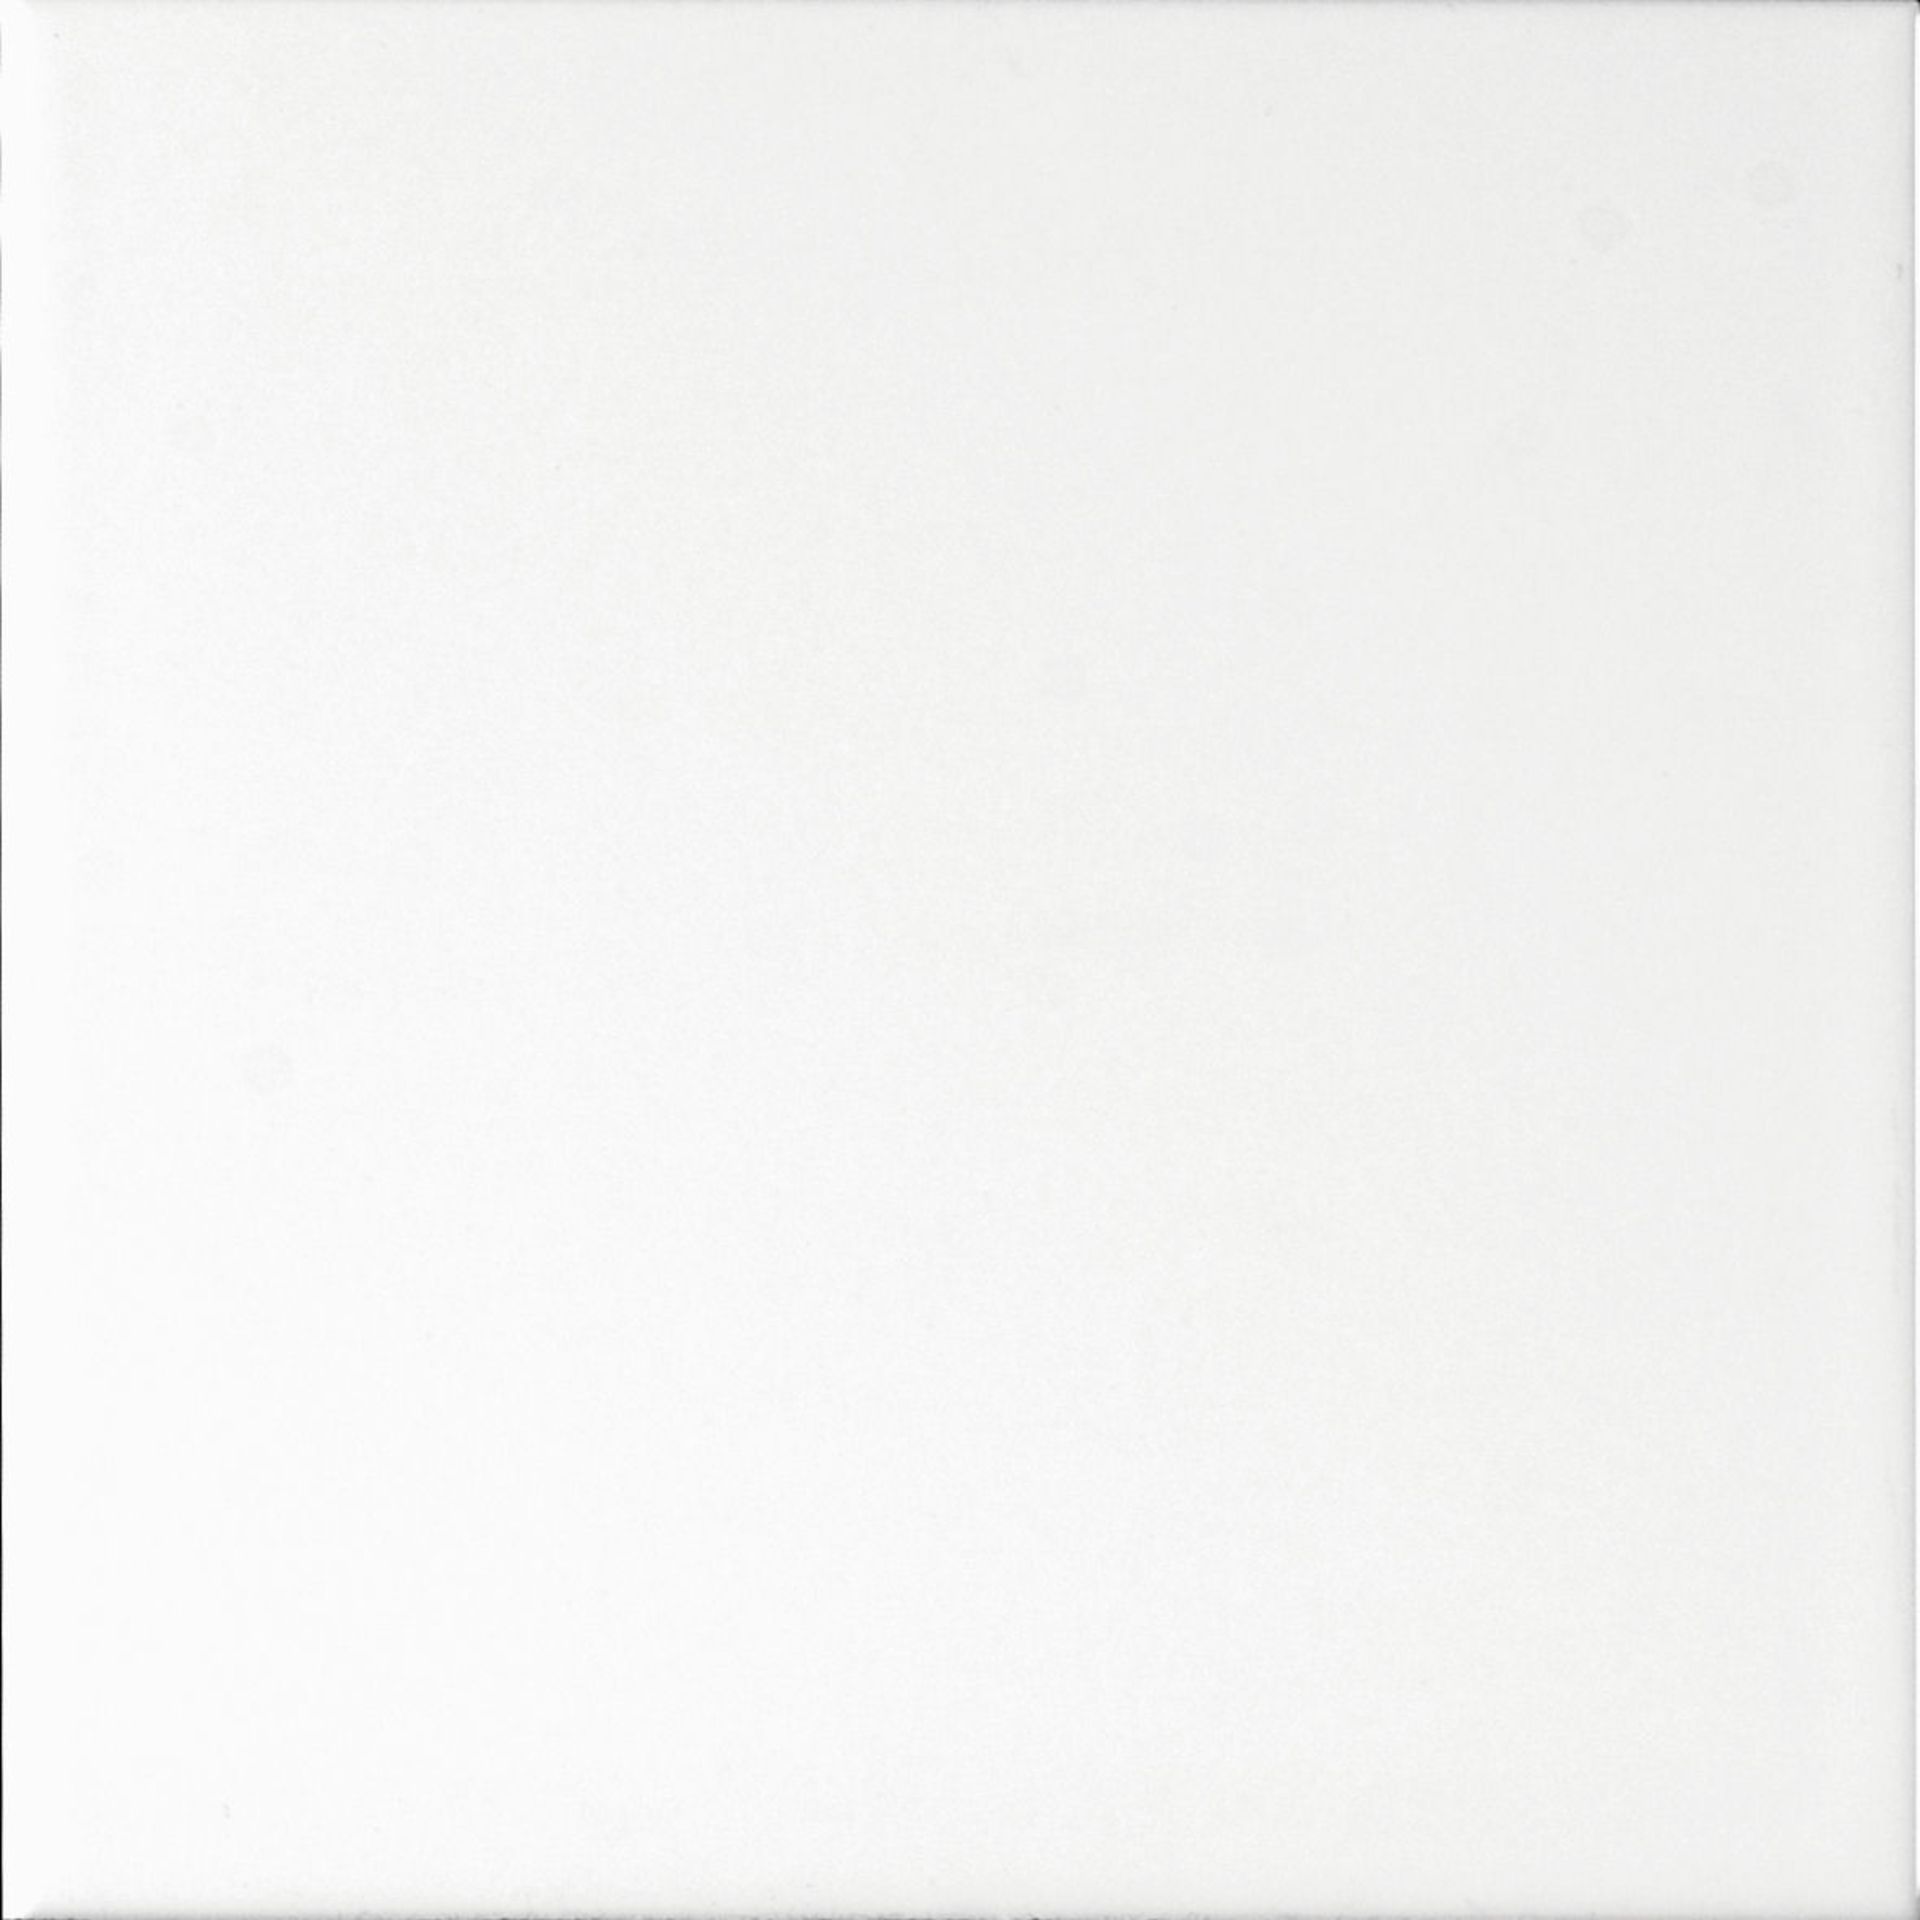 6m2 150x150mm White Square Procelian Wall Tiles. White tiles are an essential product that is ... - Image 3 of 4